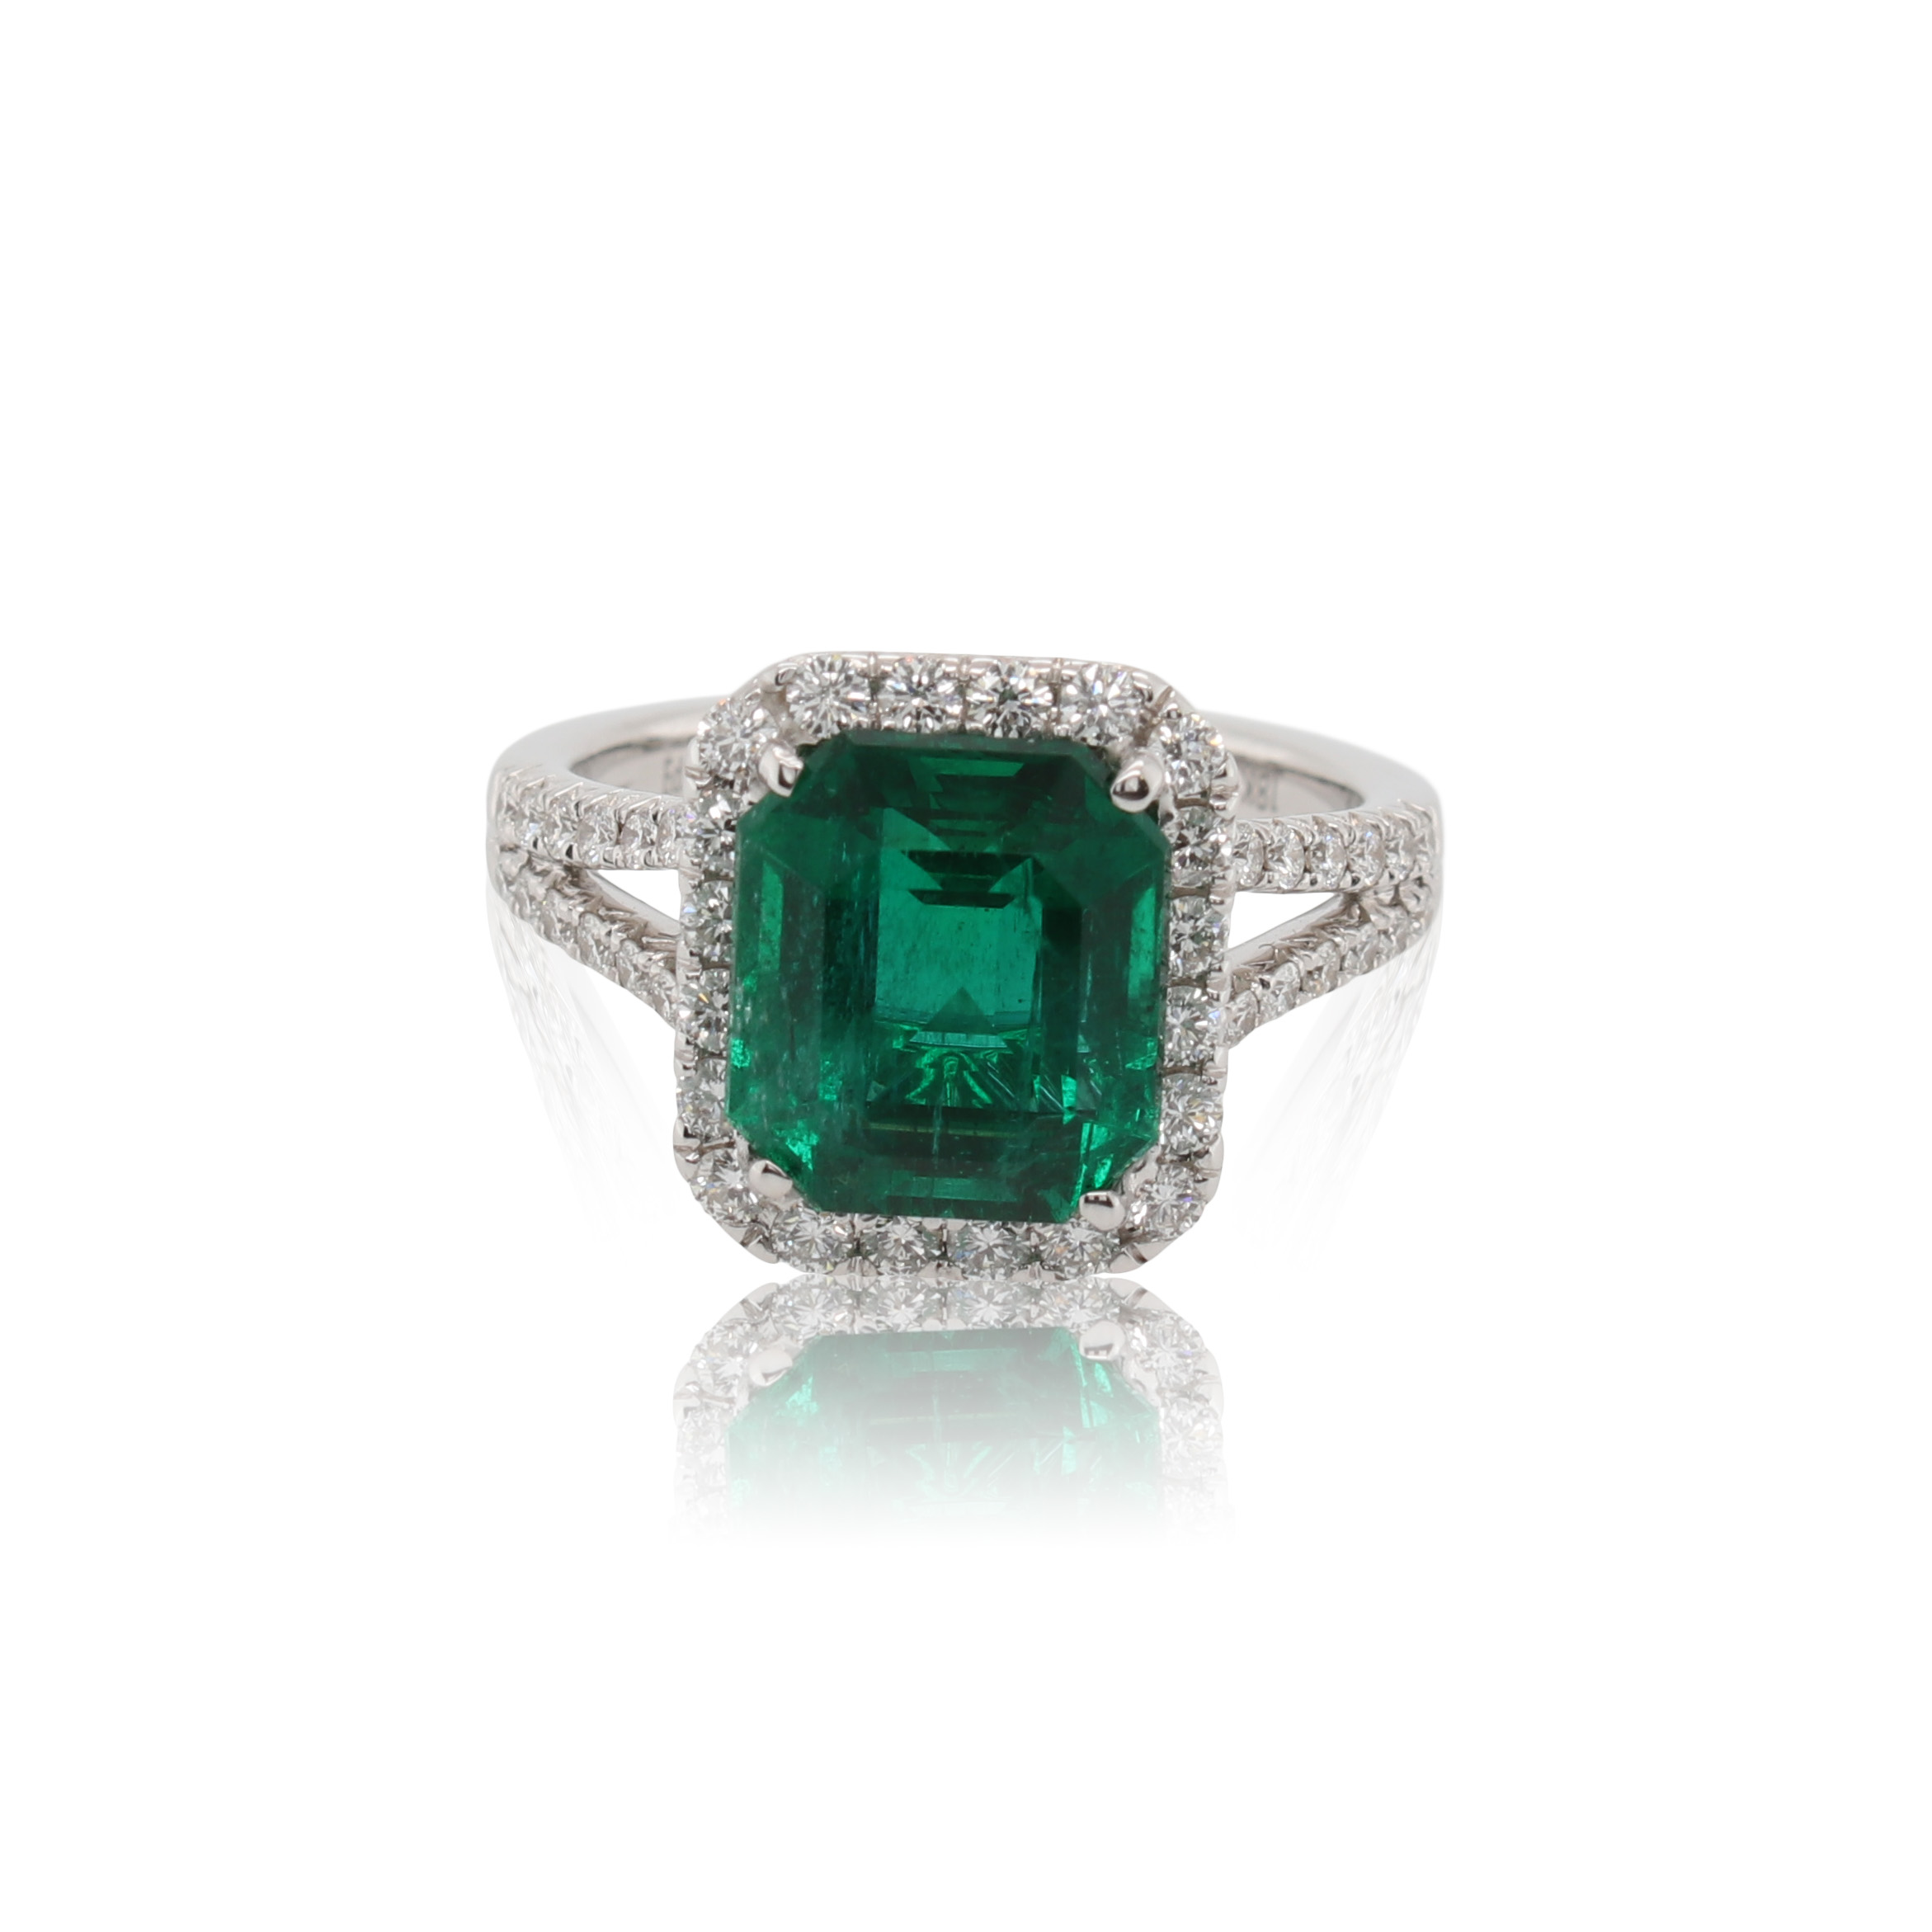 This ring is crafted from 18k white gold and features a 3.75 carat emerald and 0.90 total carats of diamond along the split shank and around the halo.